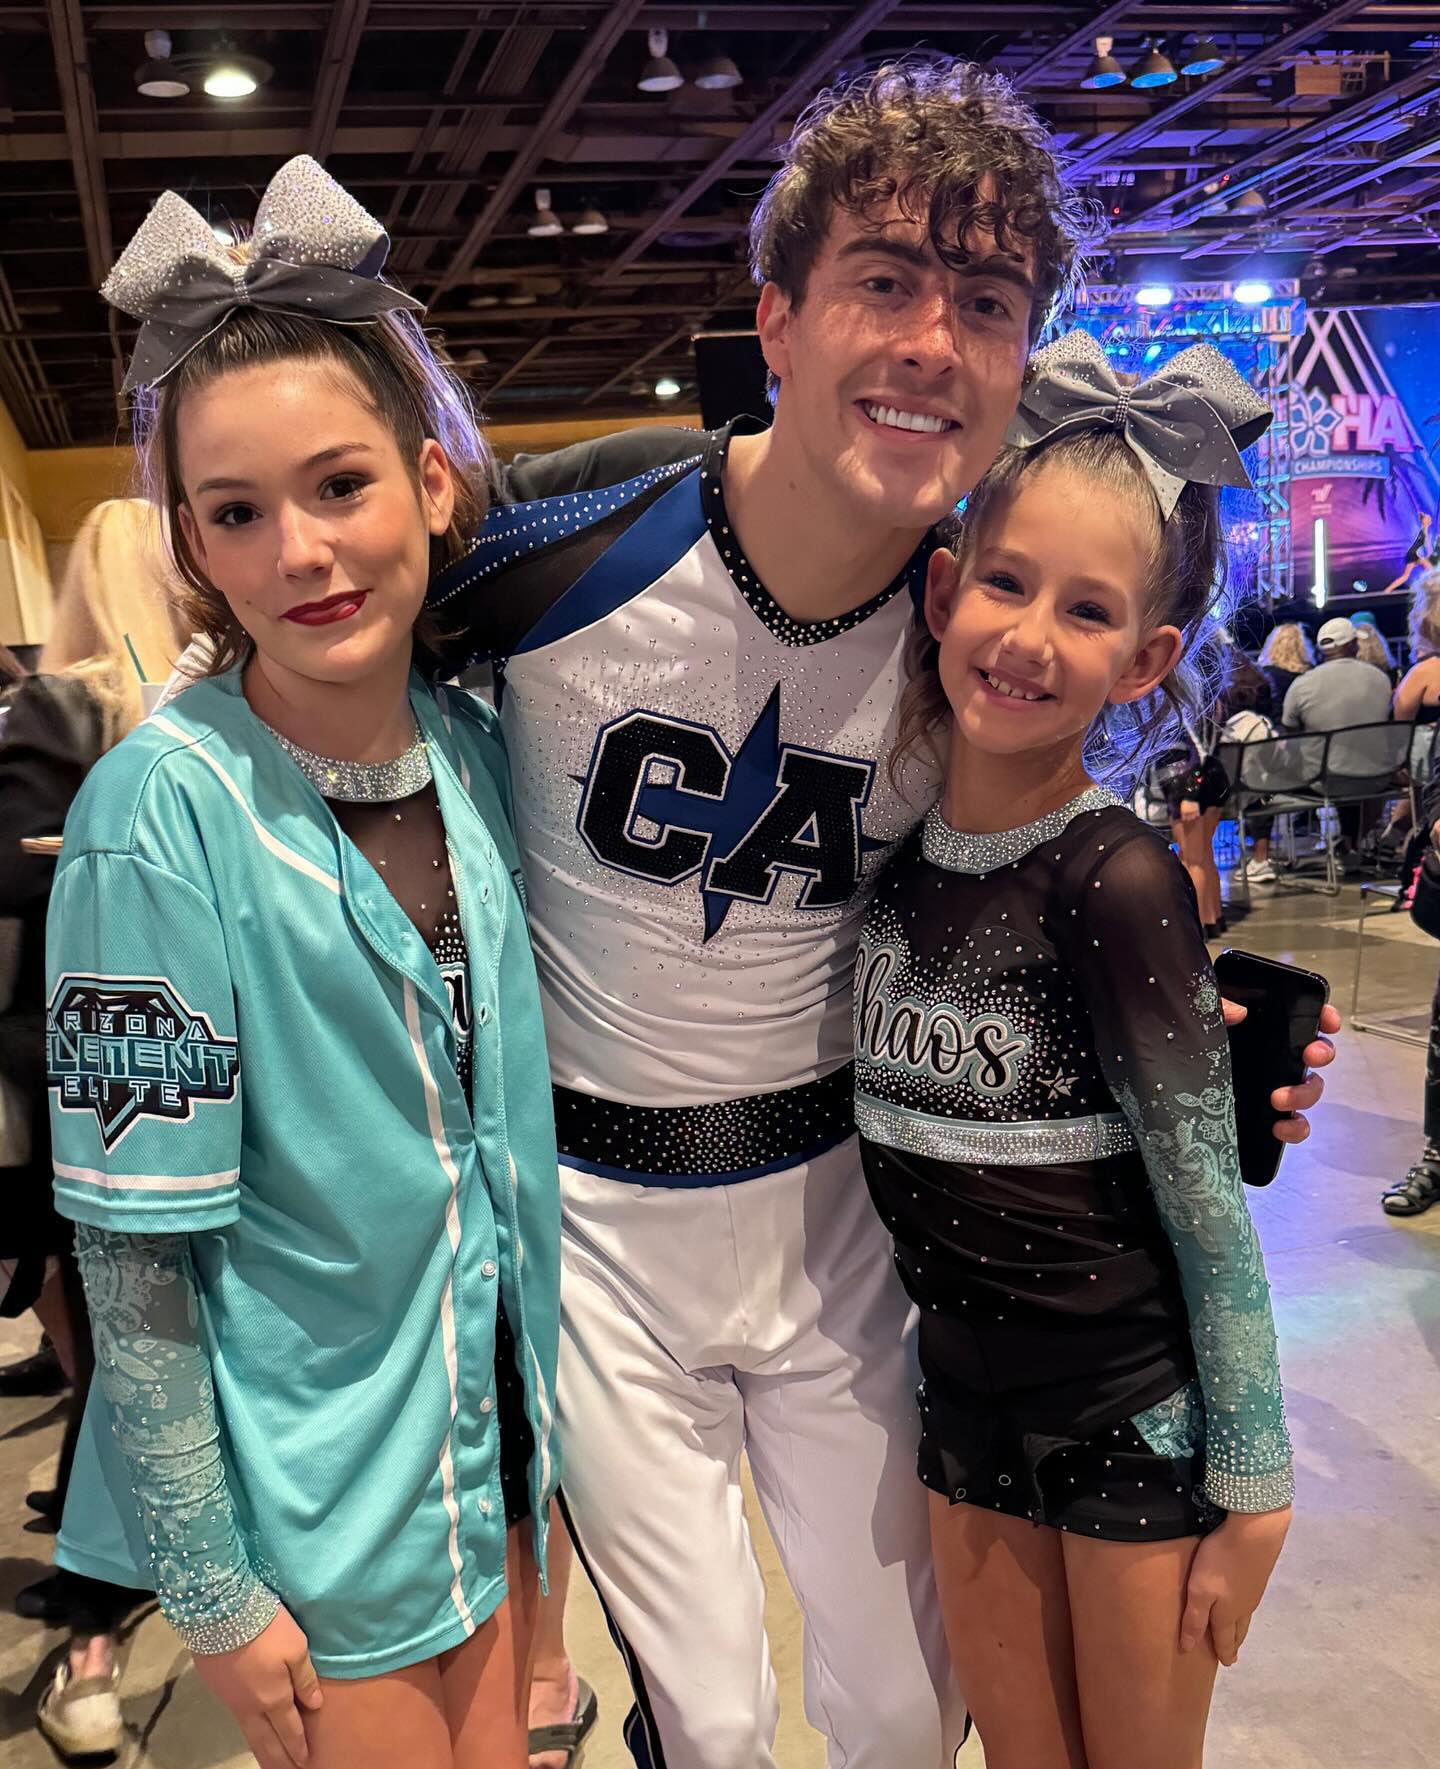 When your daughter gets to meet so many of her heroes in one weekend. 💕📣 a huge thank you to @__calismoed__ and their kind hearted athletes. 

#cheer #competition #aloha #phoenix #arizona #cheerleader #hero #thankyou #friends #daughter #pretty #bow #uniform #dance #love #life #cheerlife